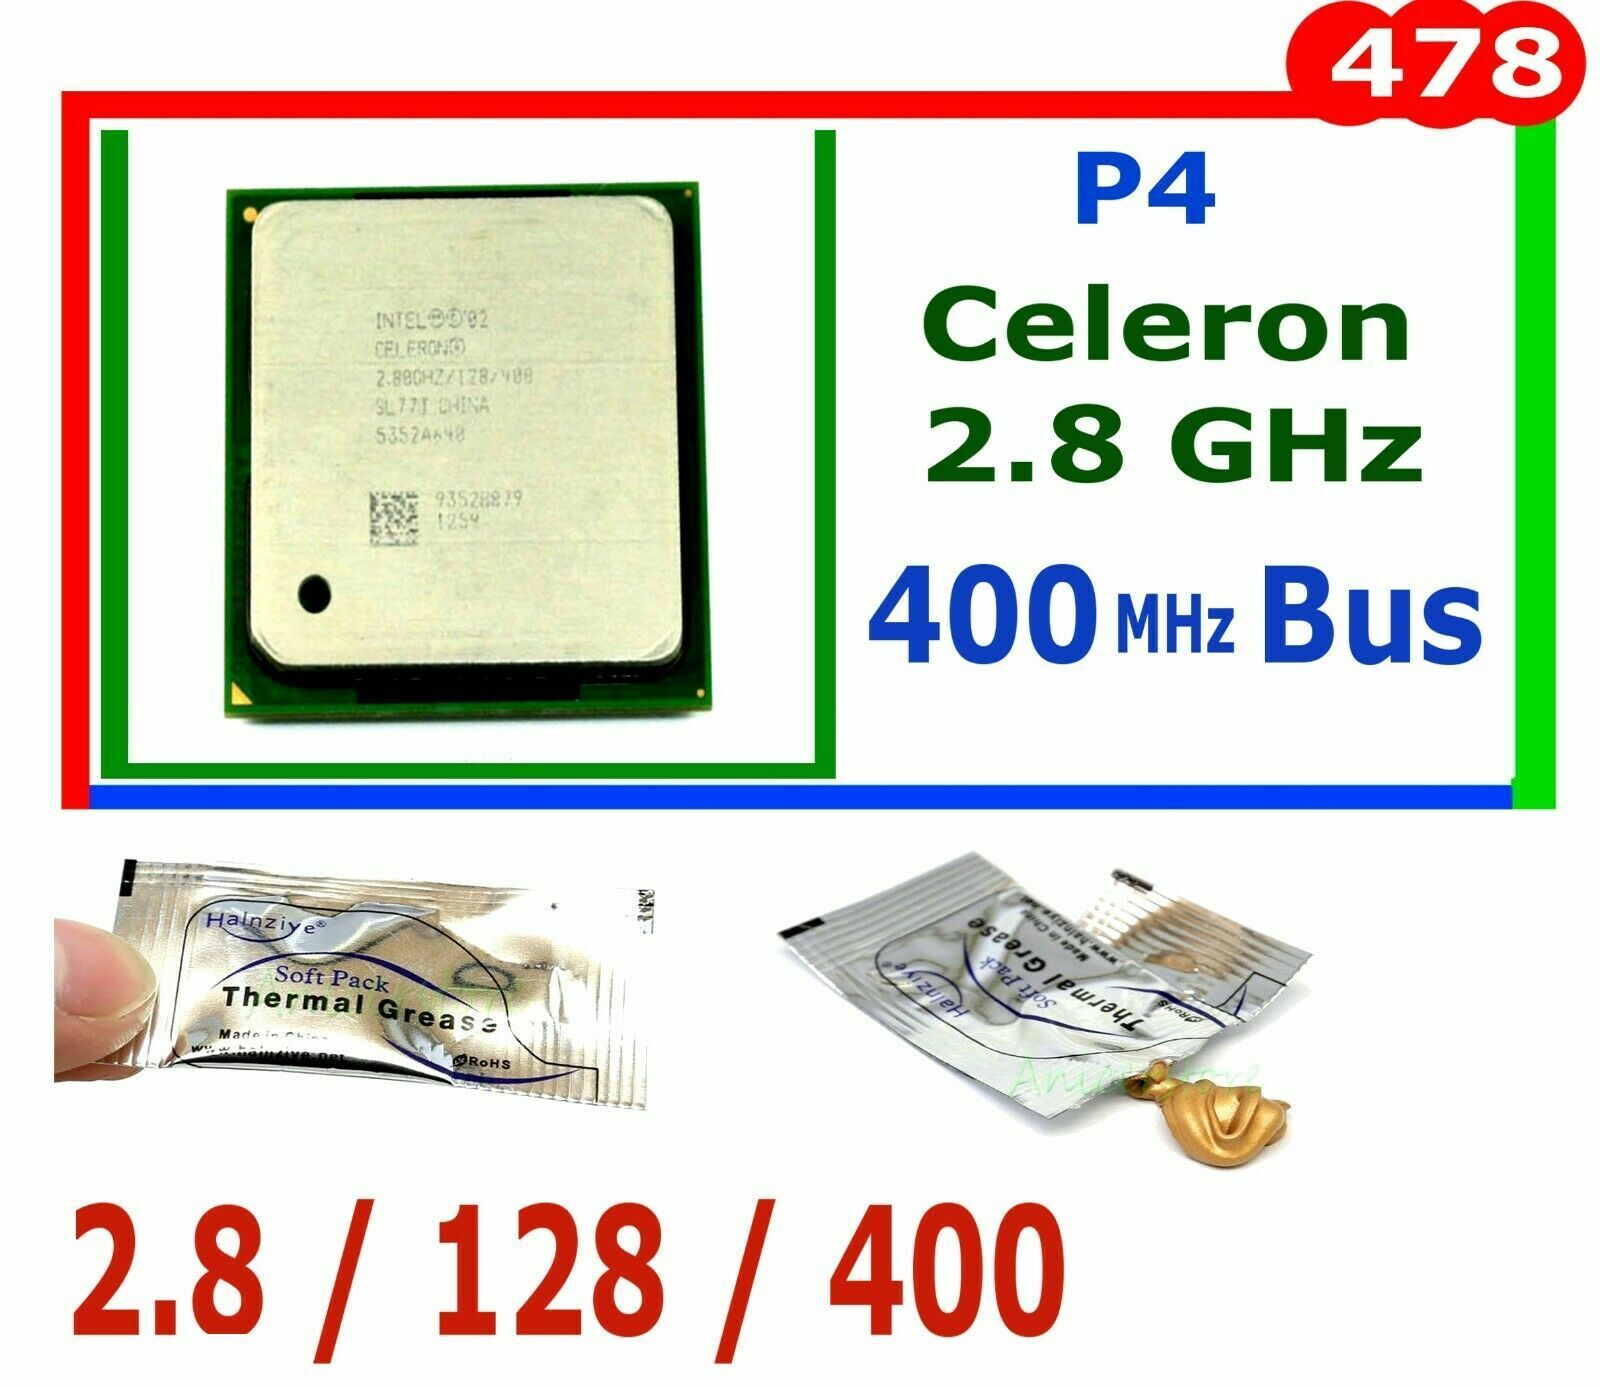 VERY RARE. 2.8 GHz Socket 478 Celeron. 400MHz Bus. With silver HS compound